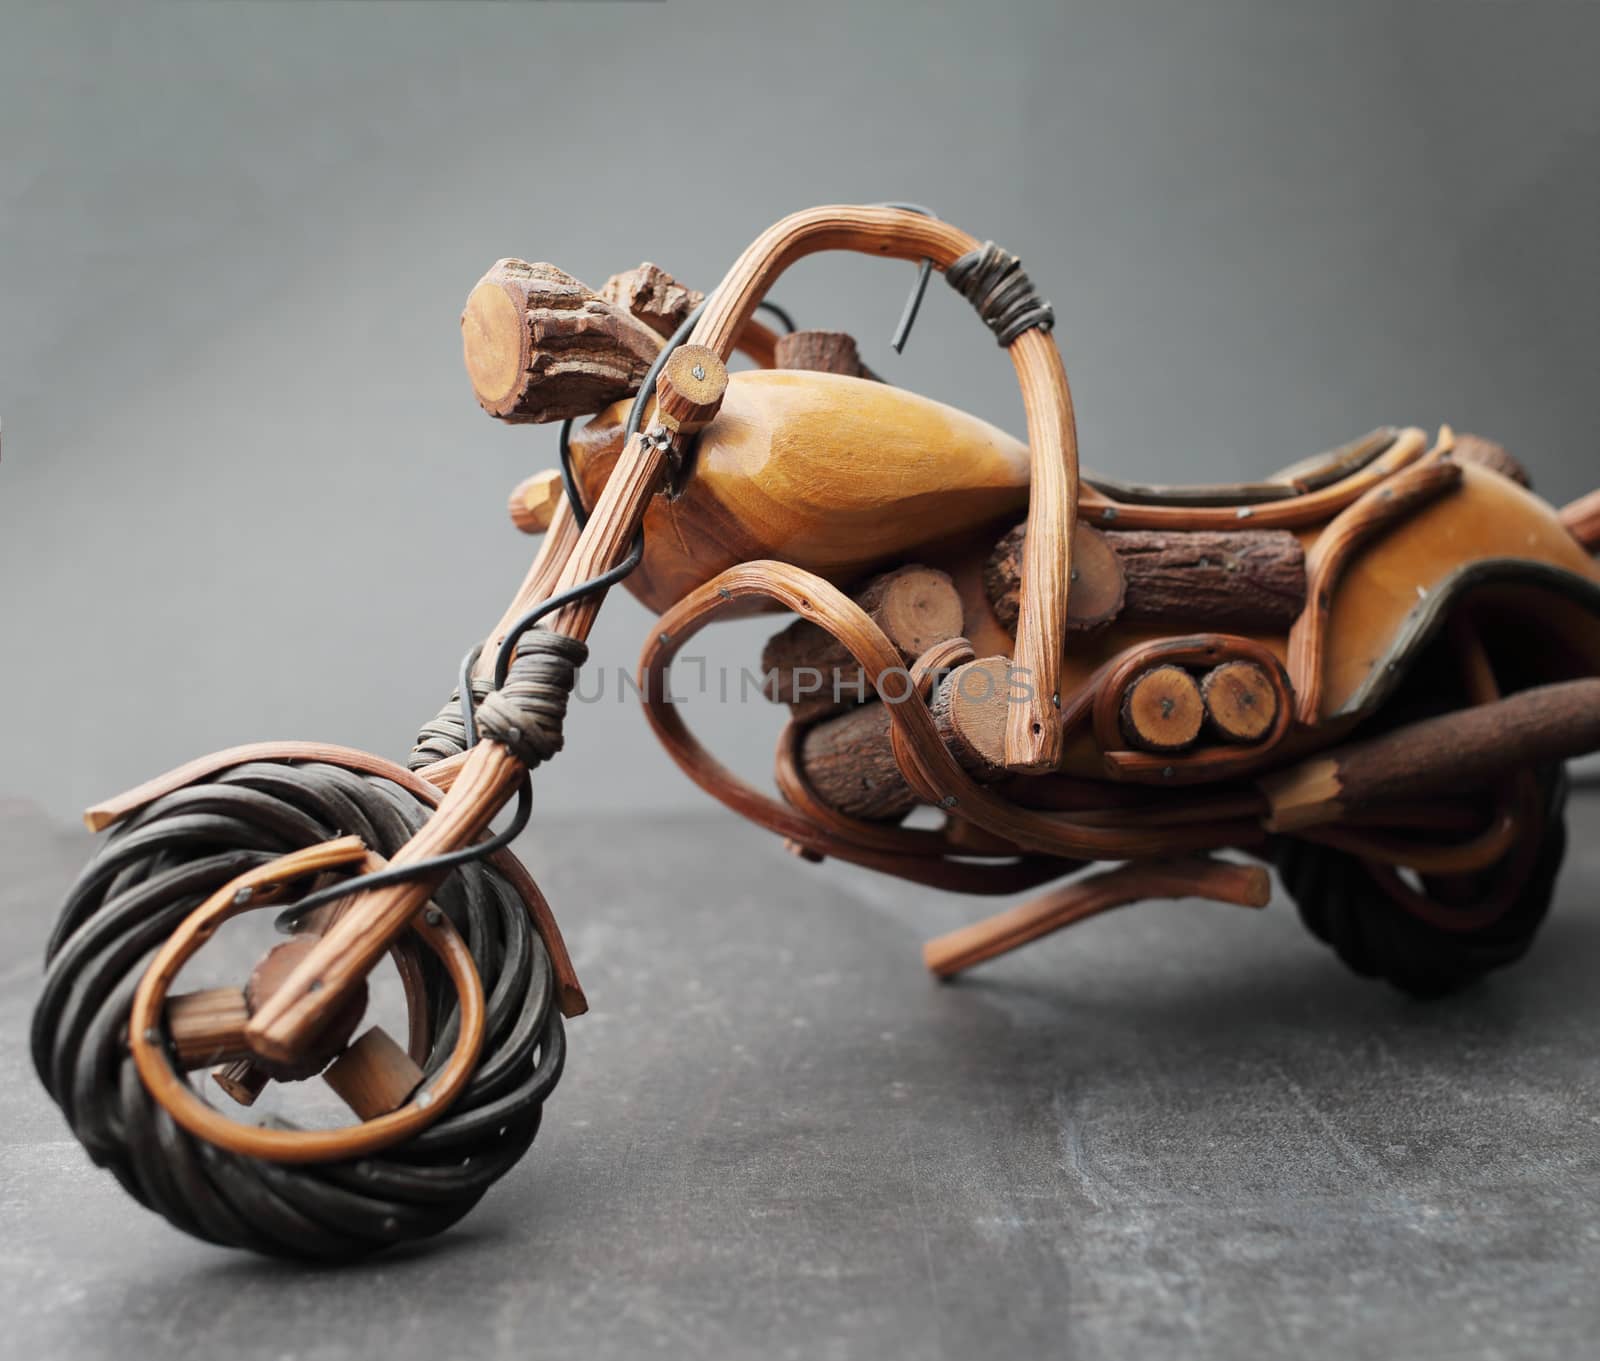 Toy motorcycle made of wood on a gray background by selinsmo